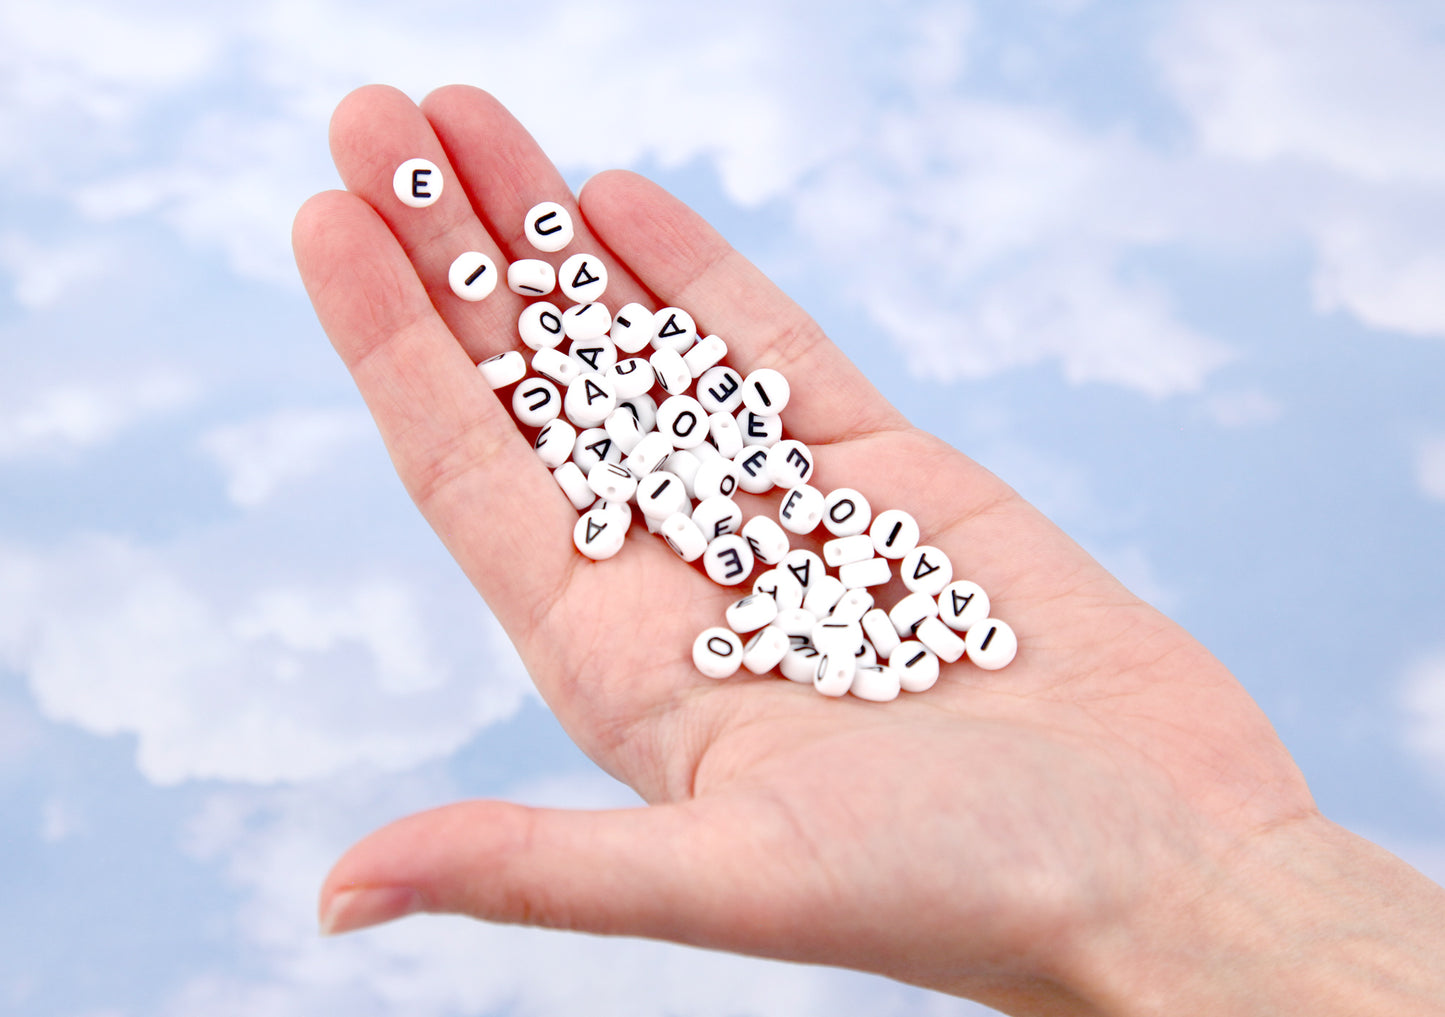 Vowels Only Letter Beads - 7mm Little Round White Vowel Alphabet Acrylic or Resin Beads - 300 pc set